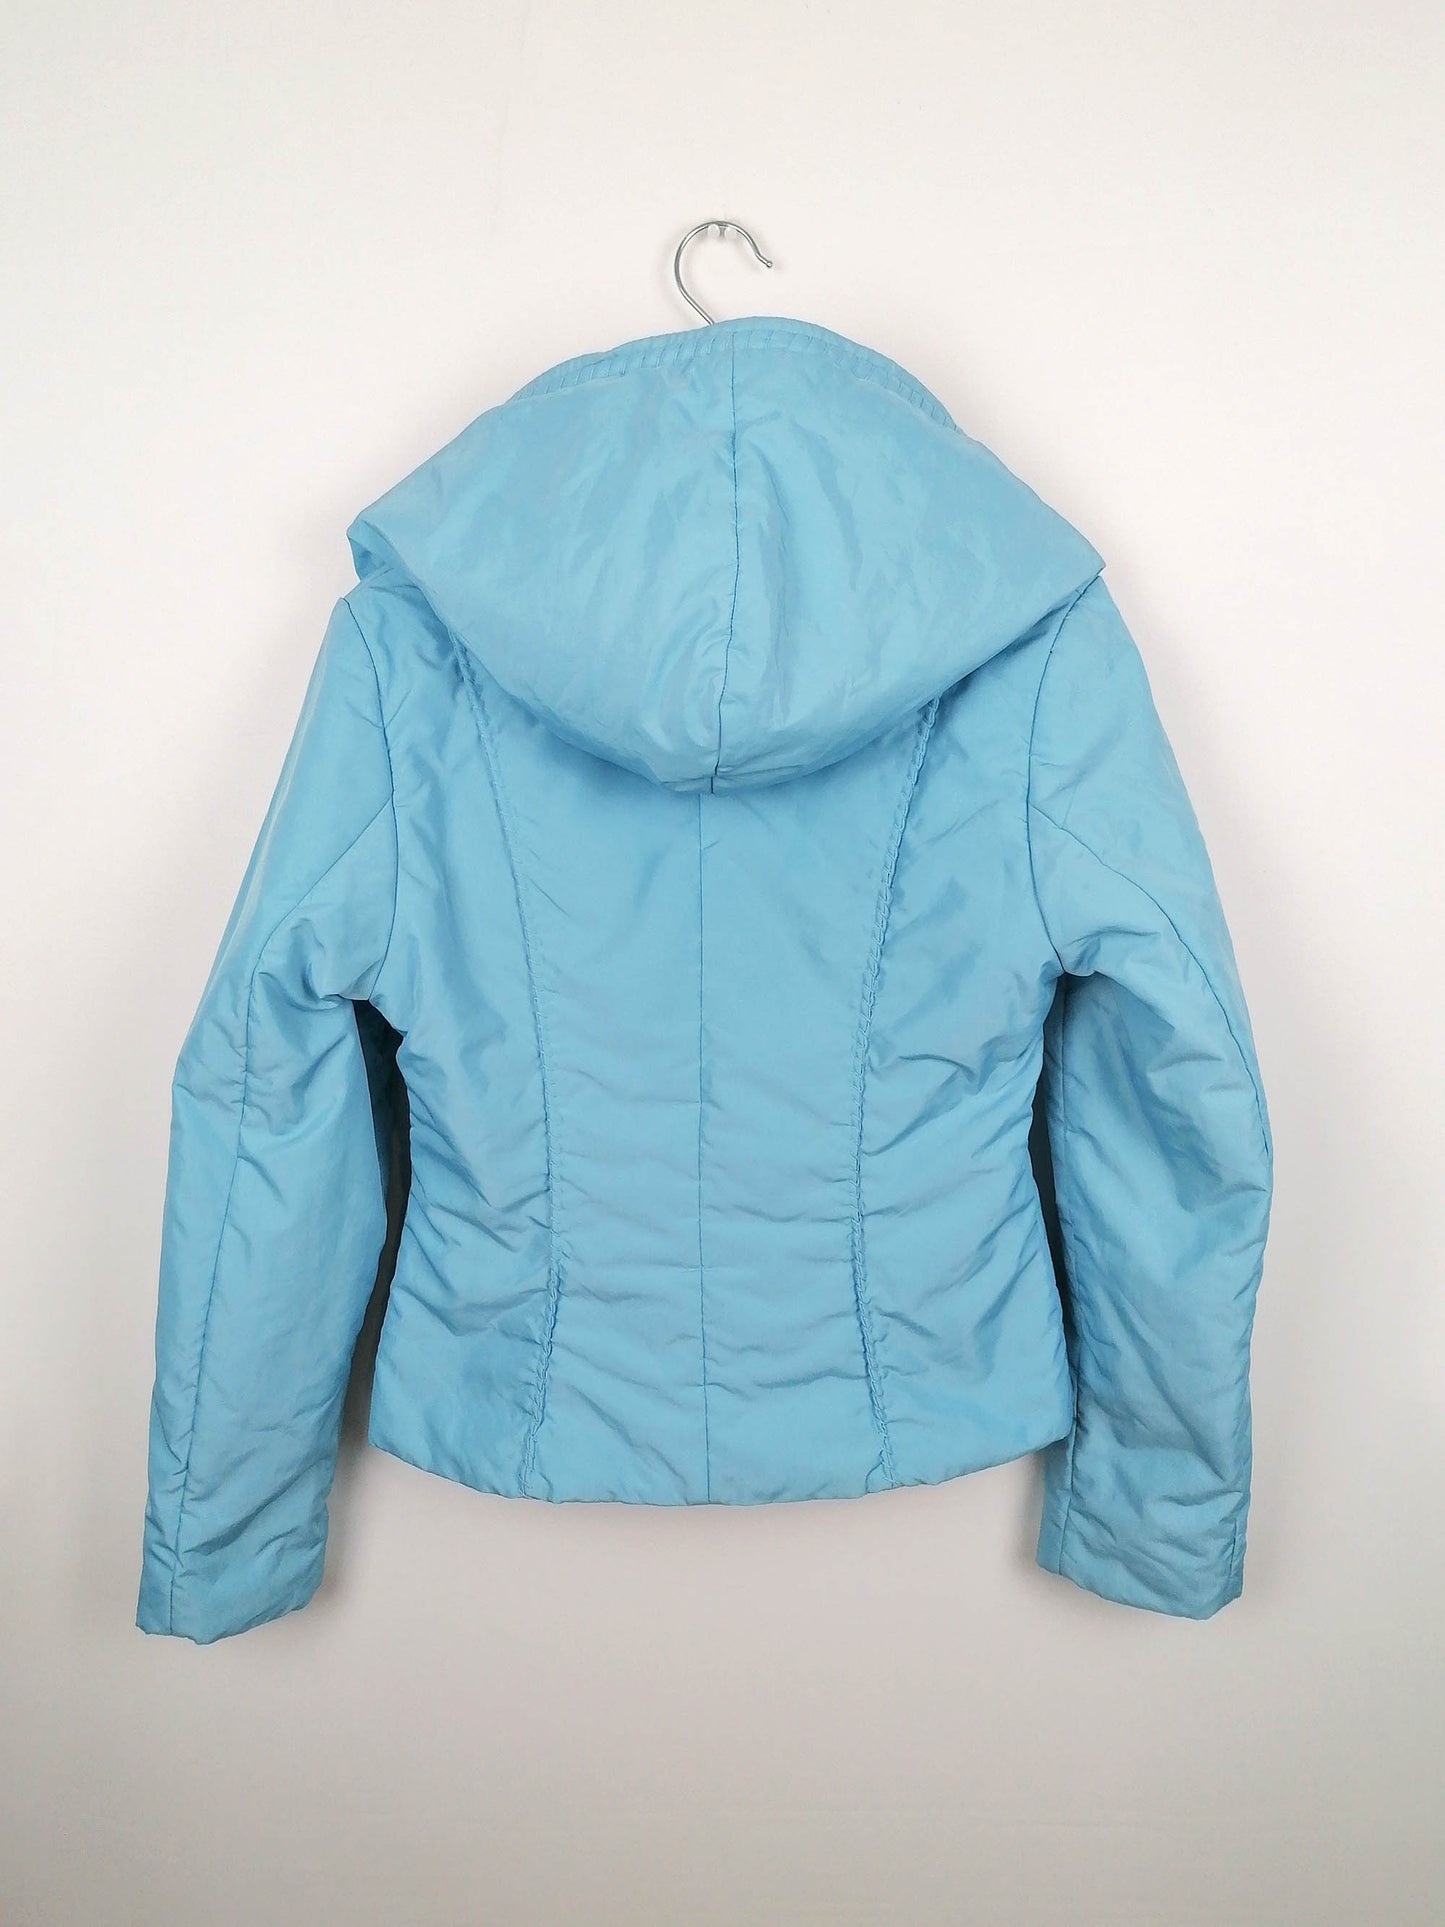 Y2K Snow Image Pastel Blue Fitted Jacket with Hood - size S-M